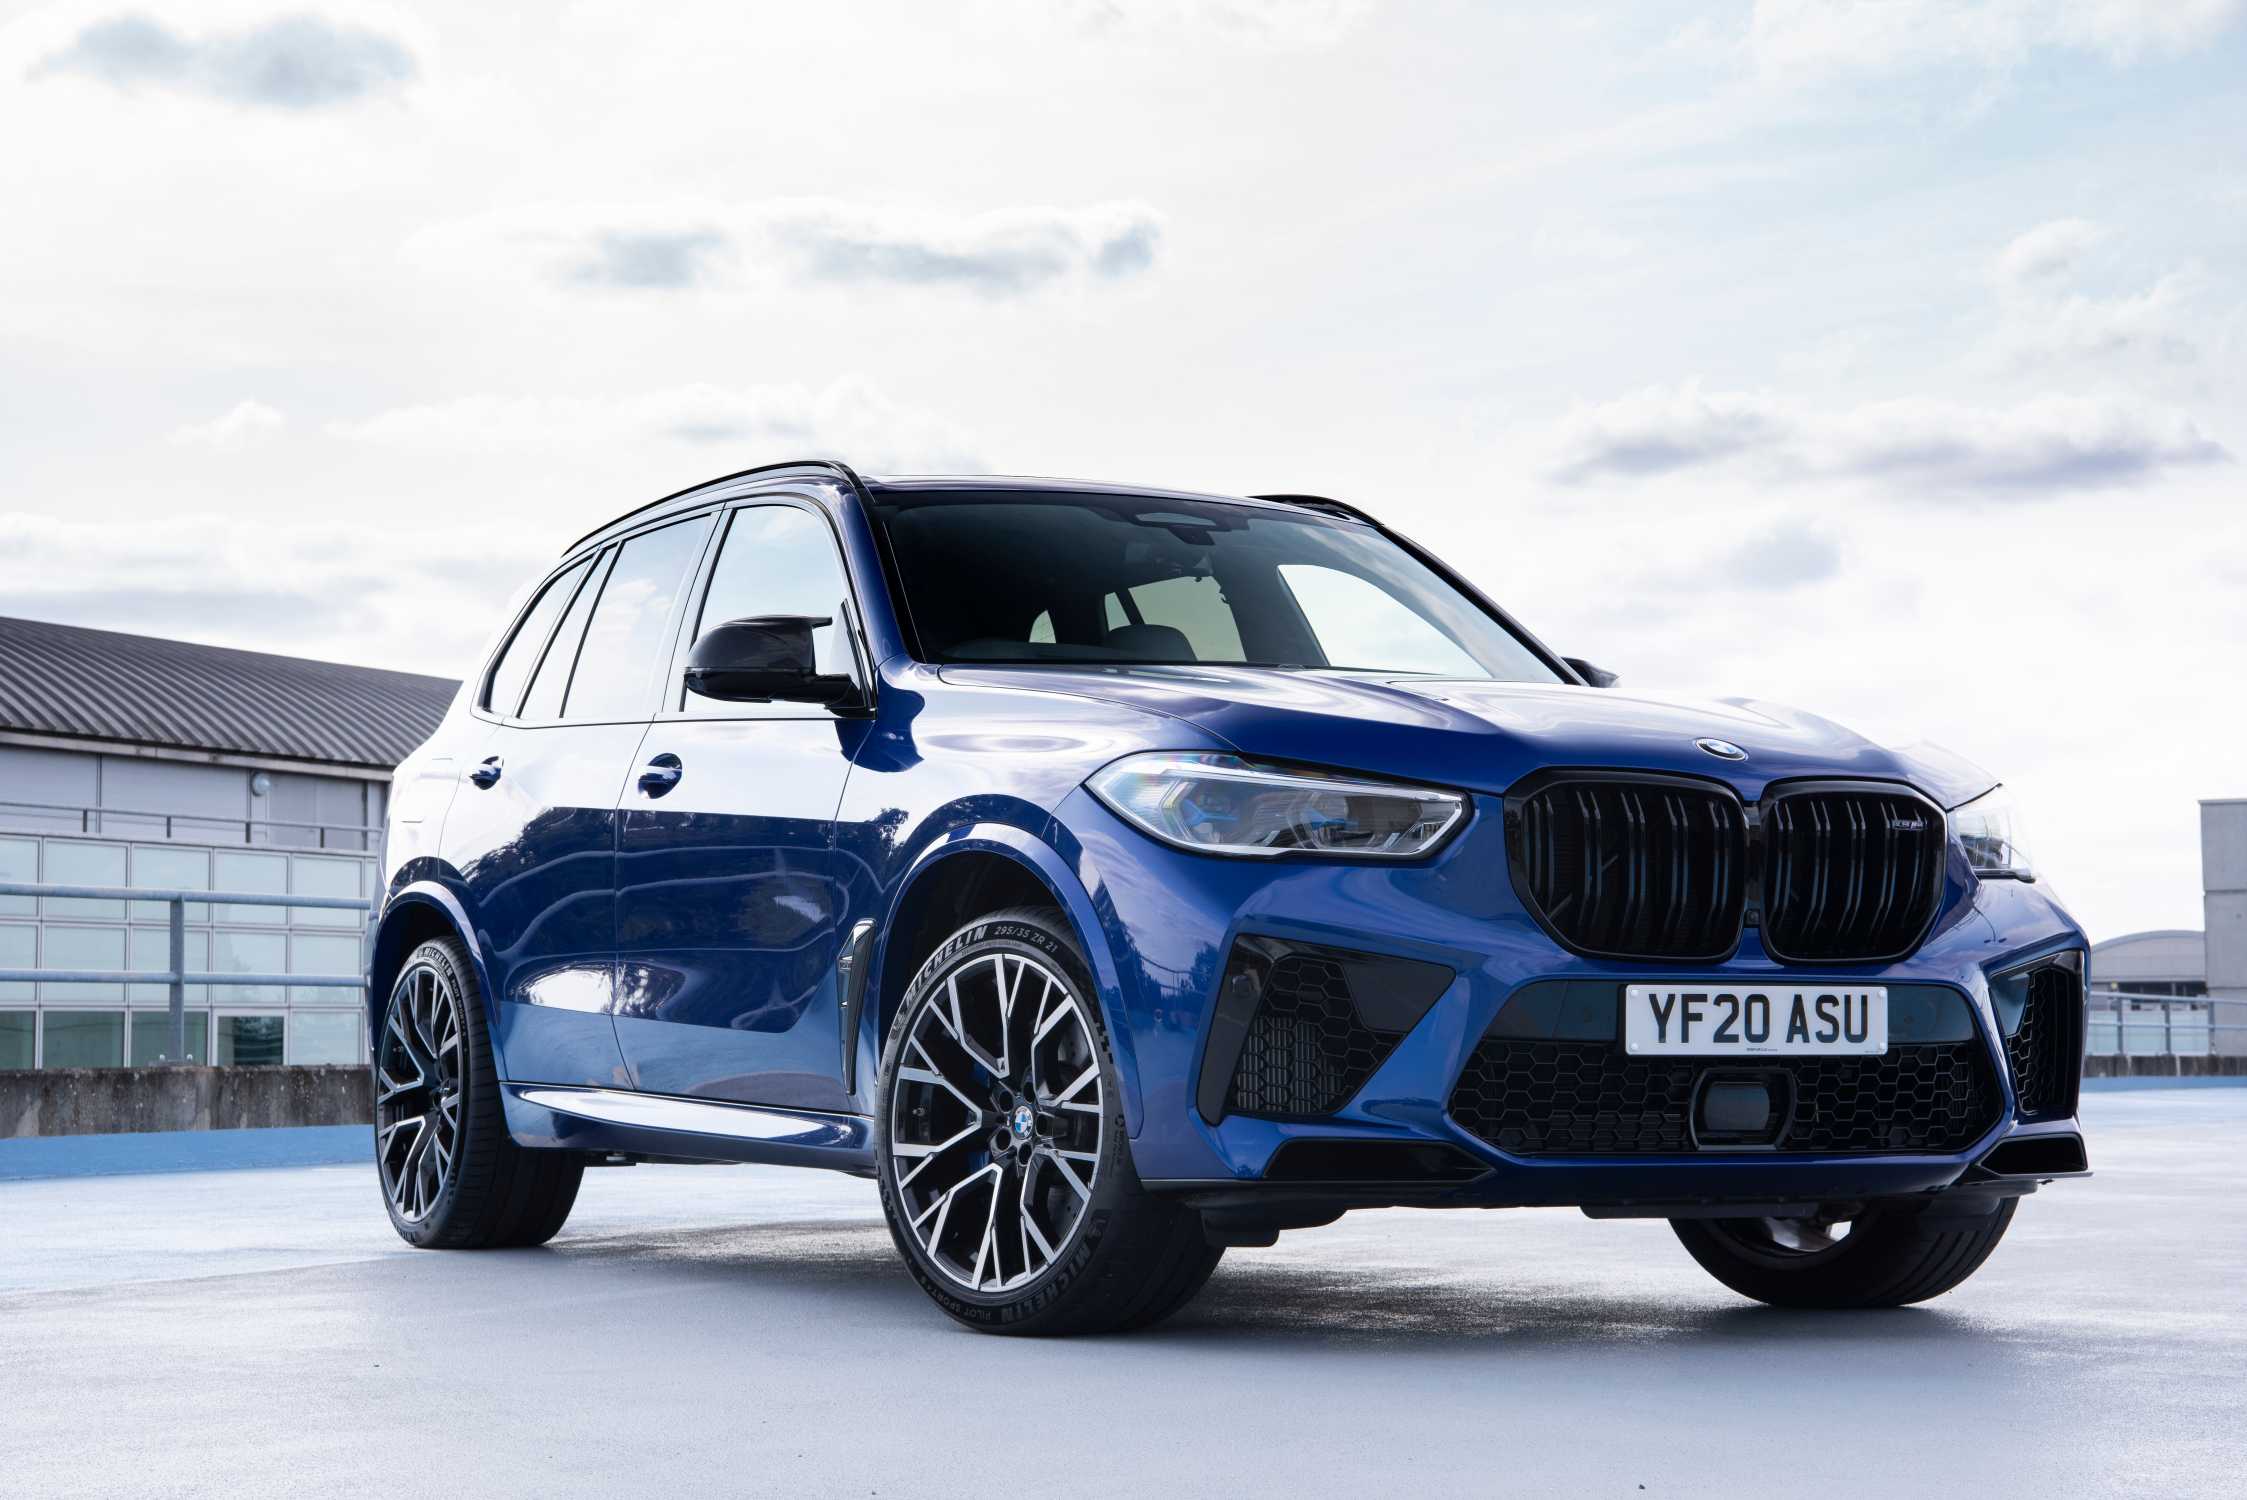 The new BMW X5 M Competition. The new BMW X6 M Competition.